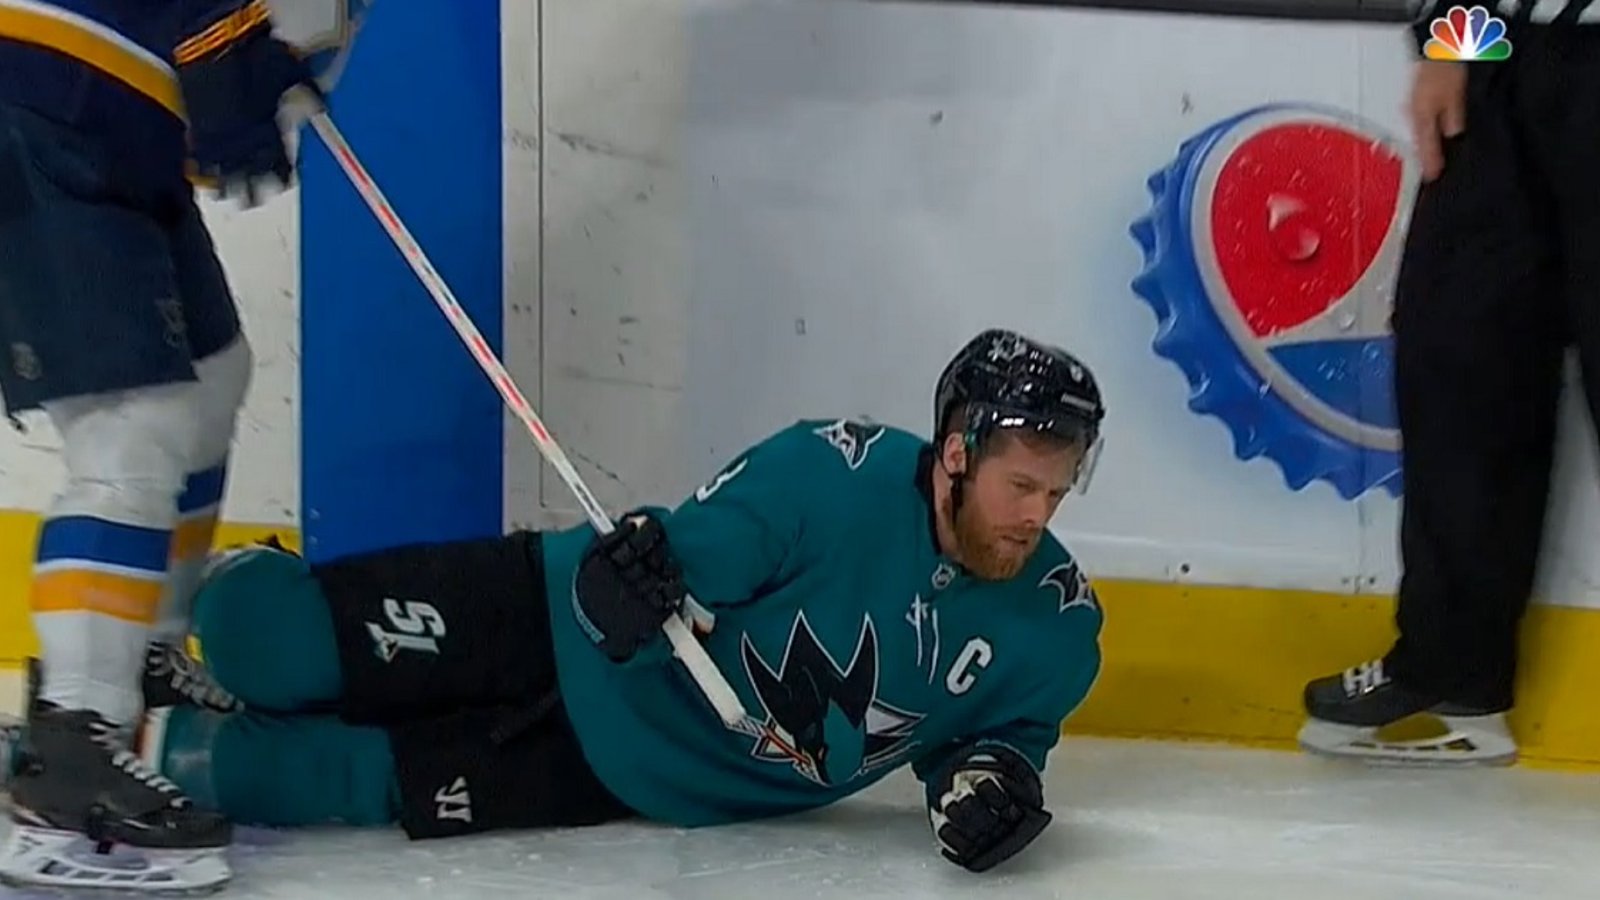 Breaking: Karlsson, Pavelski and Donskoi out for the Sharks in the 3rd!